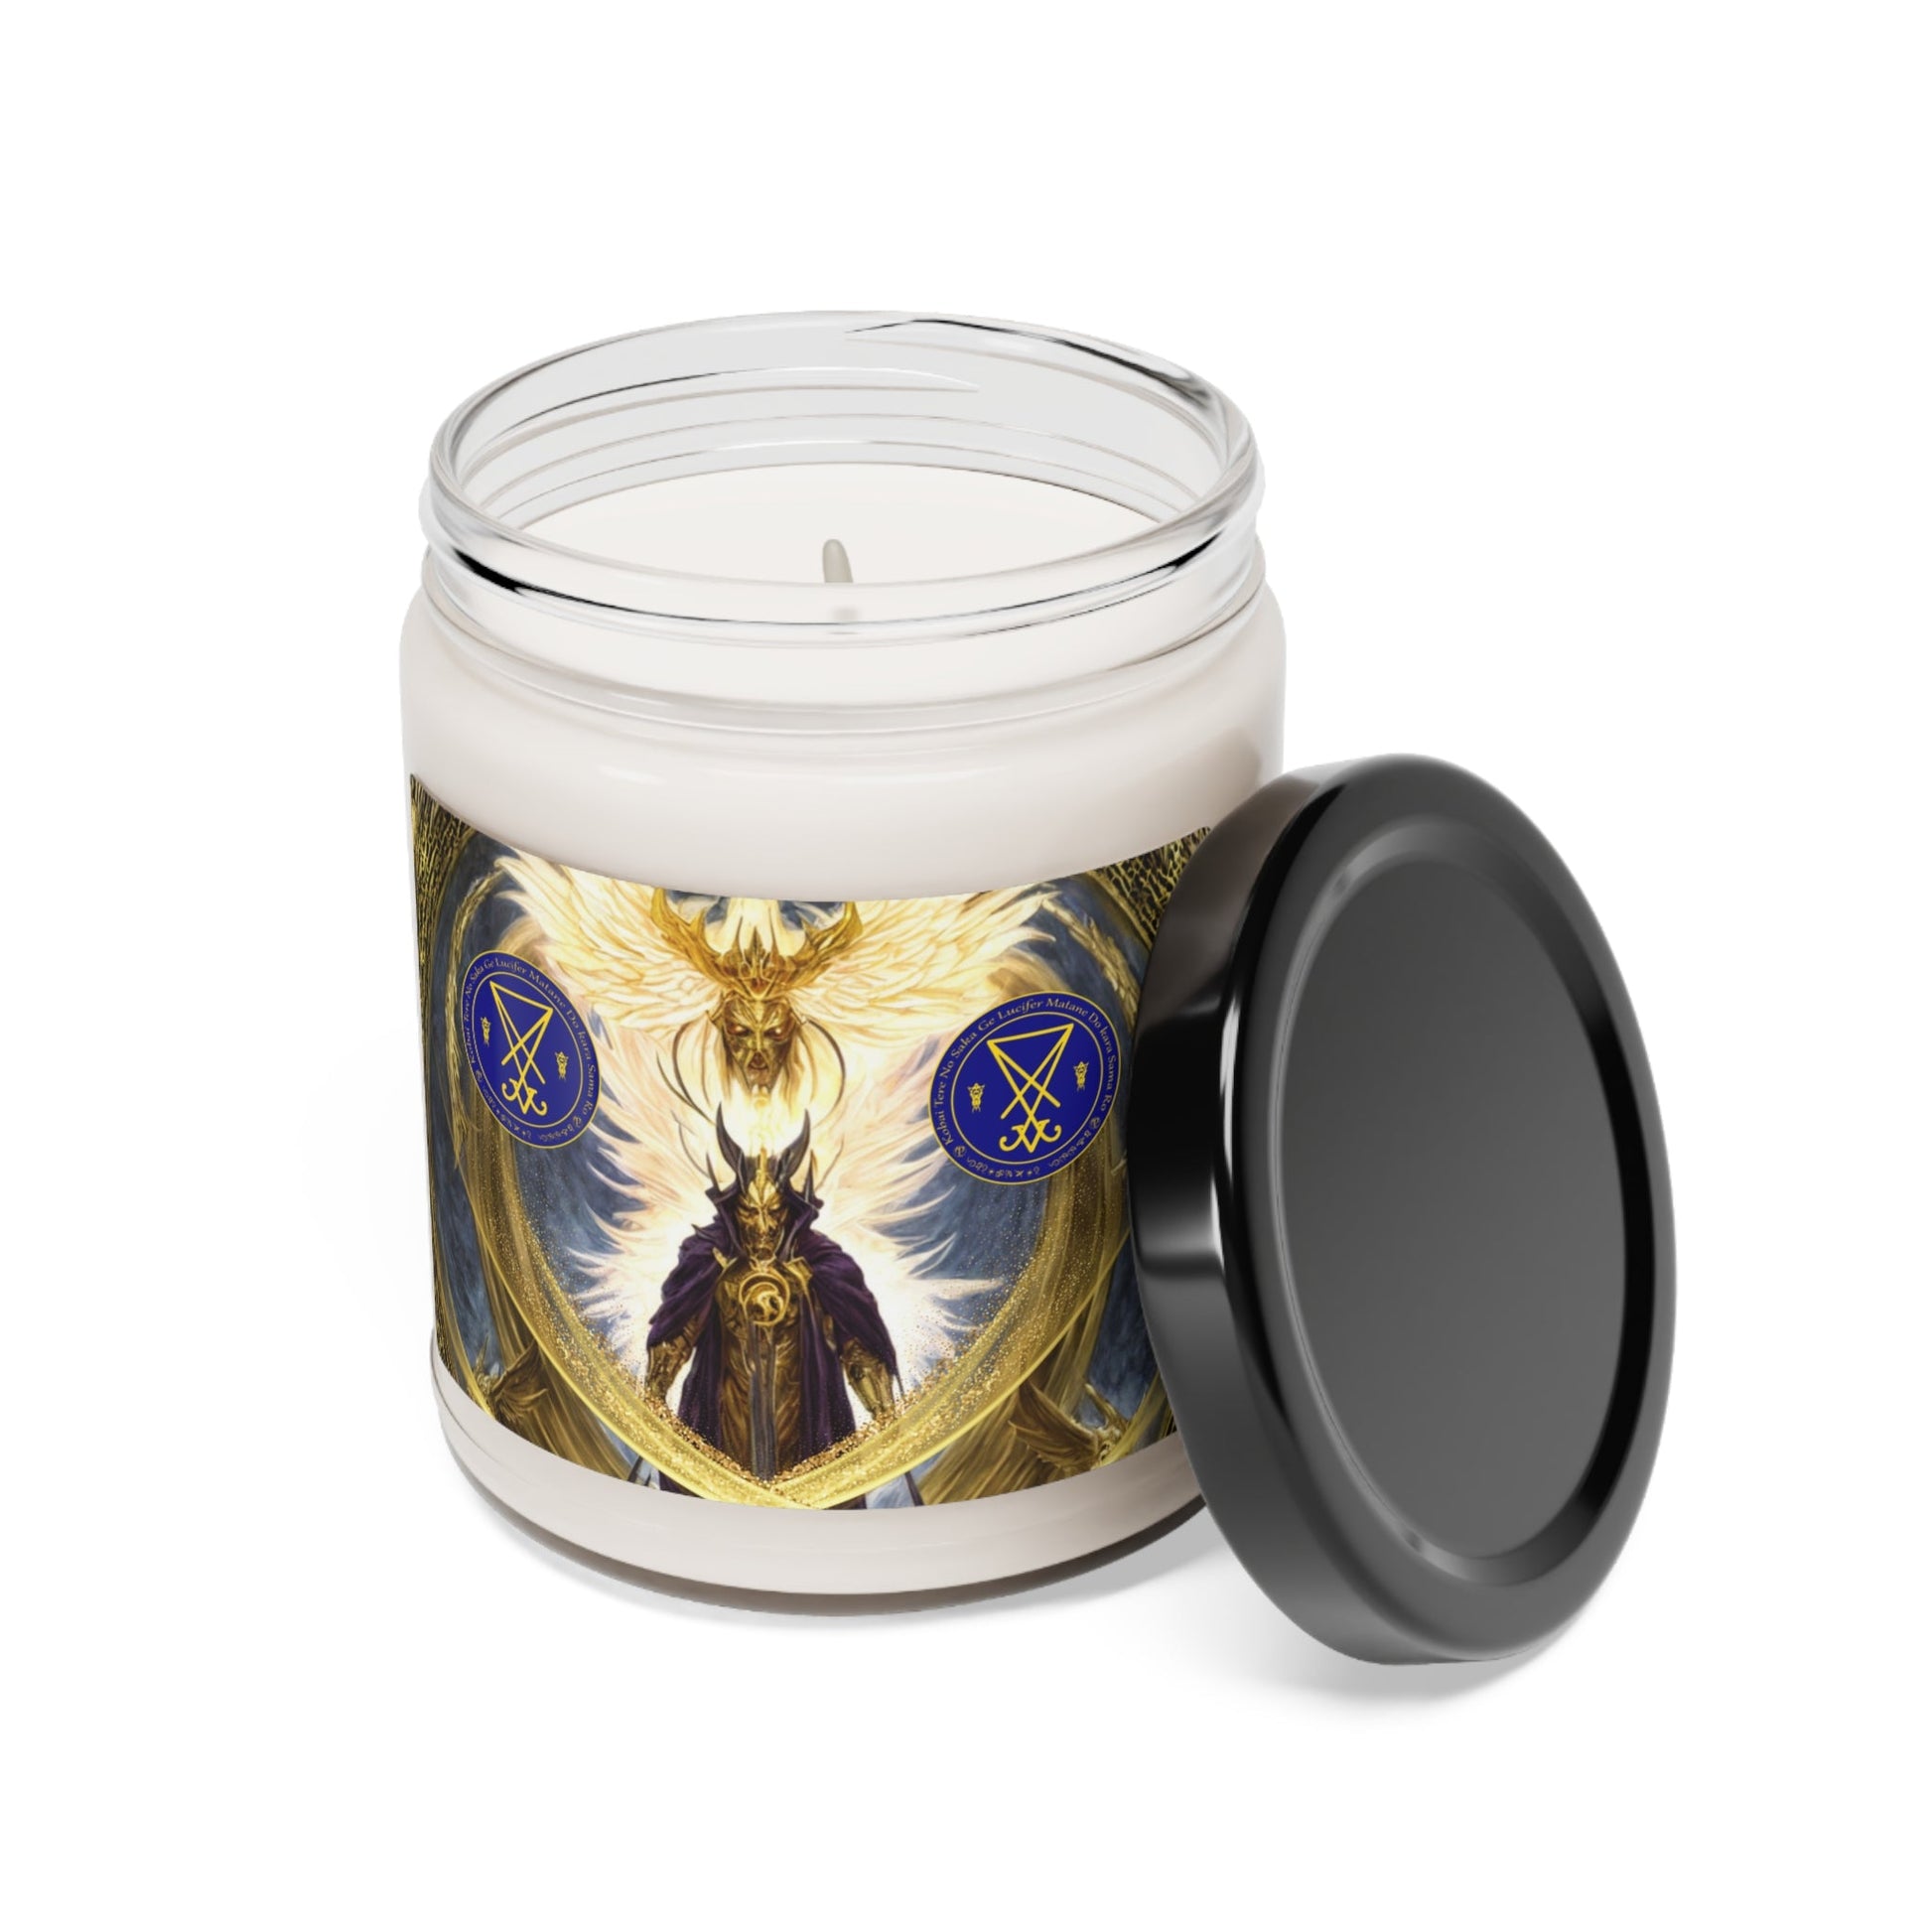 Demon-Lucifer-Scented-Soy-Candle-for-Altar-offerings-rituals-initiations-or-praying-and-meditation-7